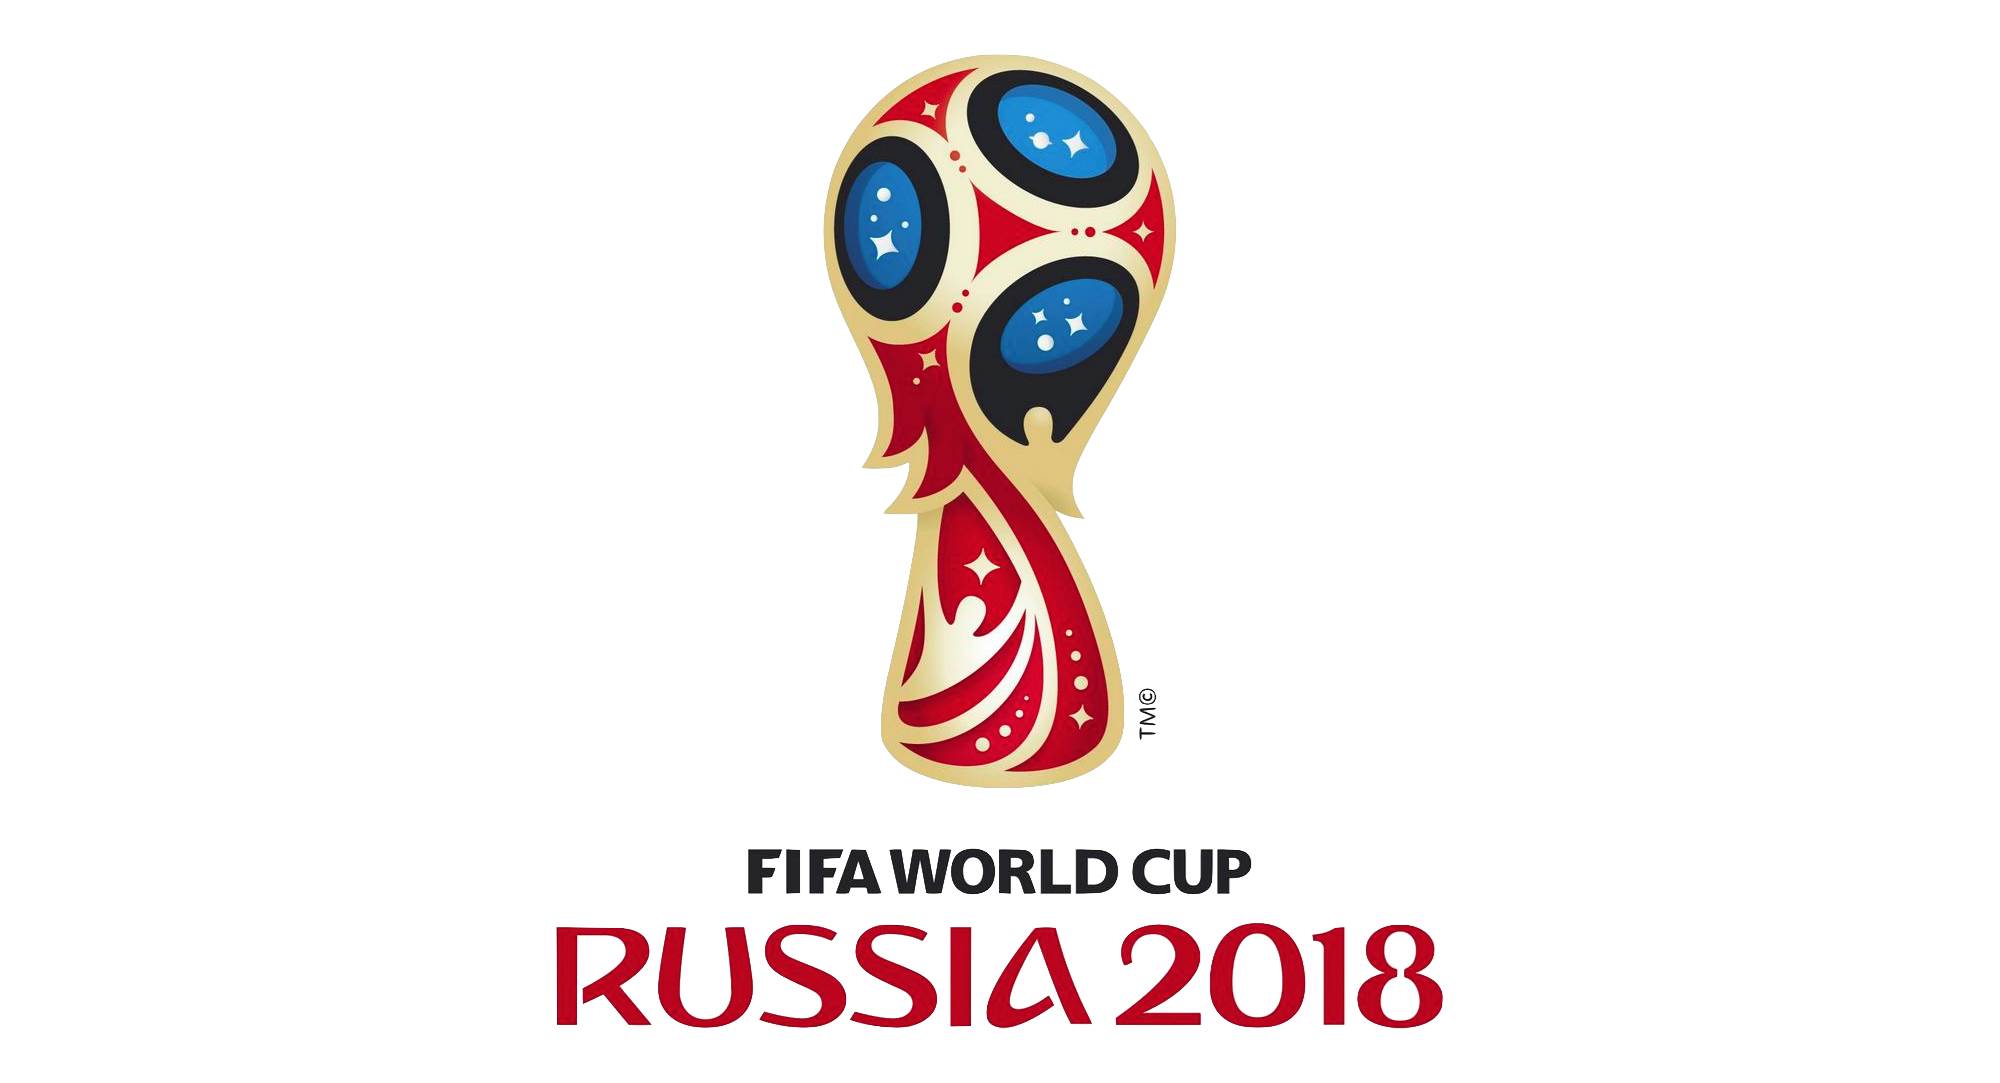 Scammers using FIFA World Cup as a lure